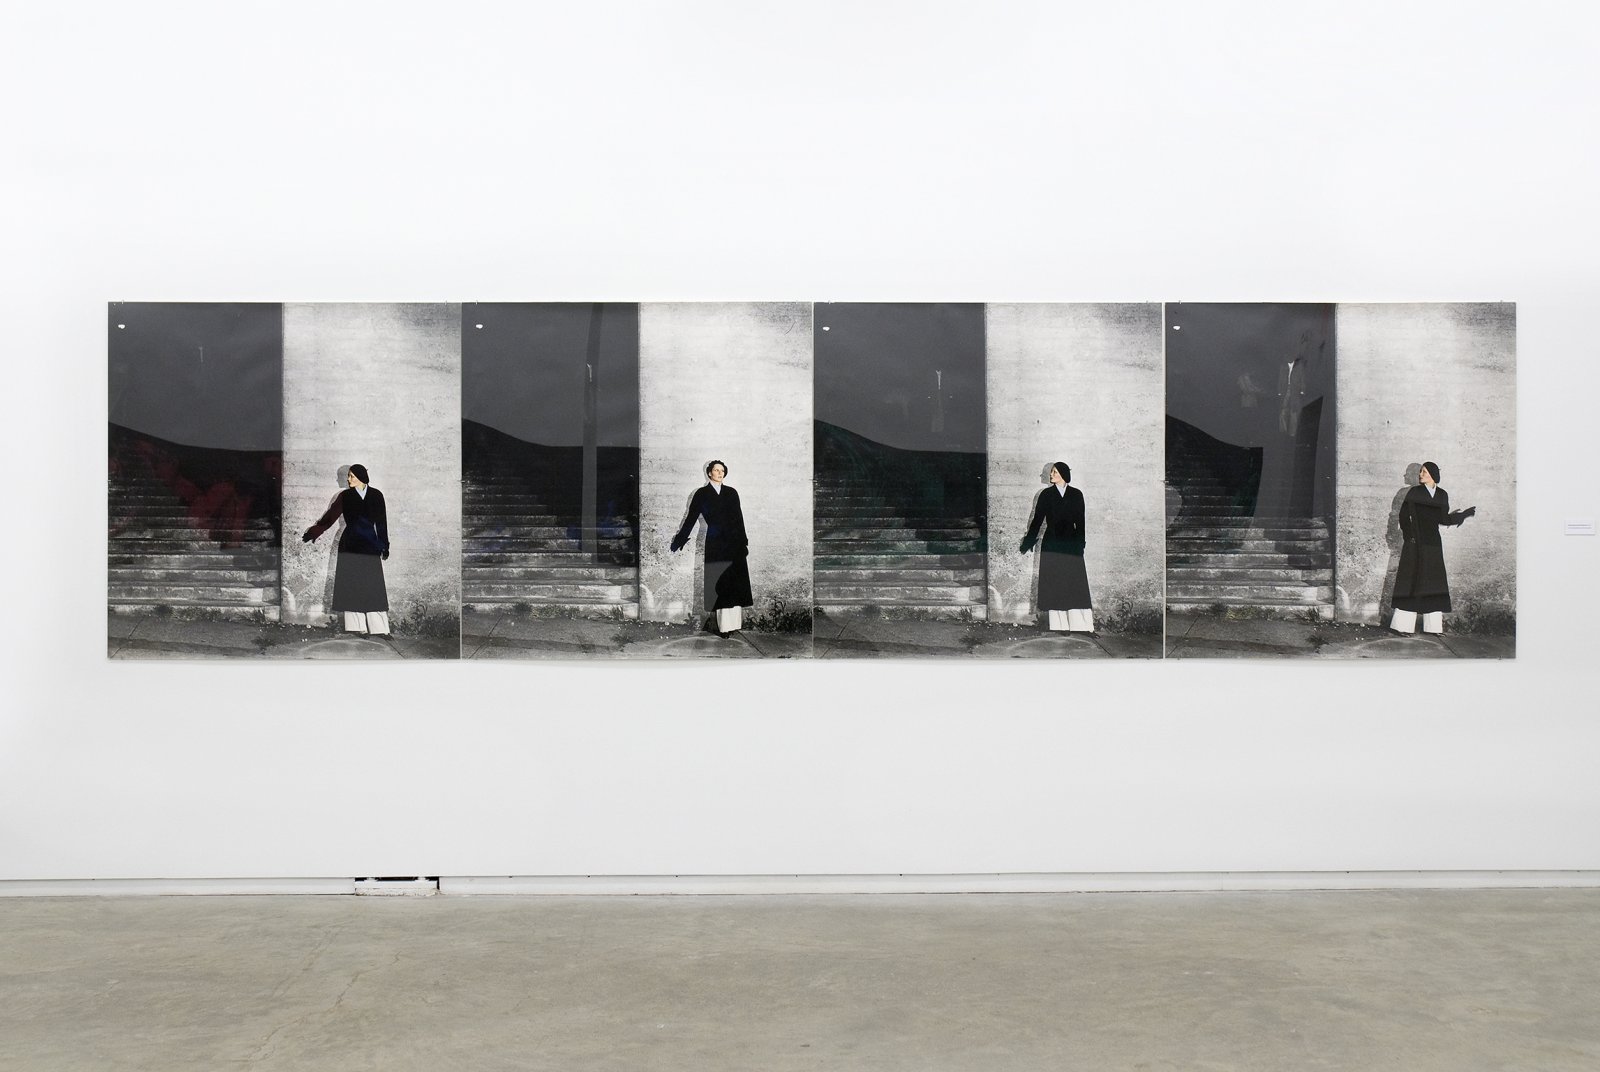 Ian Wallace, Hypnerotomachia (the Staircase), 1977, 4 hand-coloured black and white photographs, 48 x 192 in. (122 x 488 cm) ​ by Ian Wallace